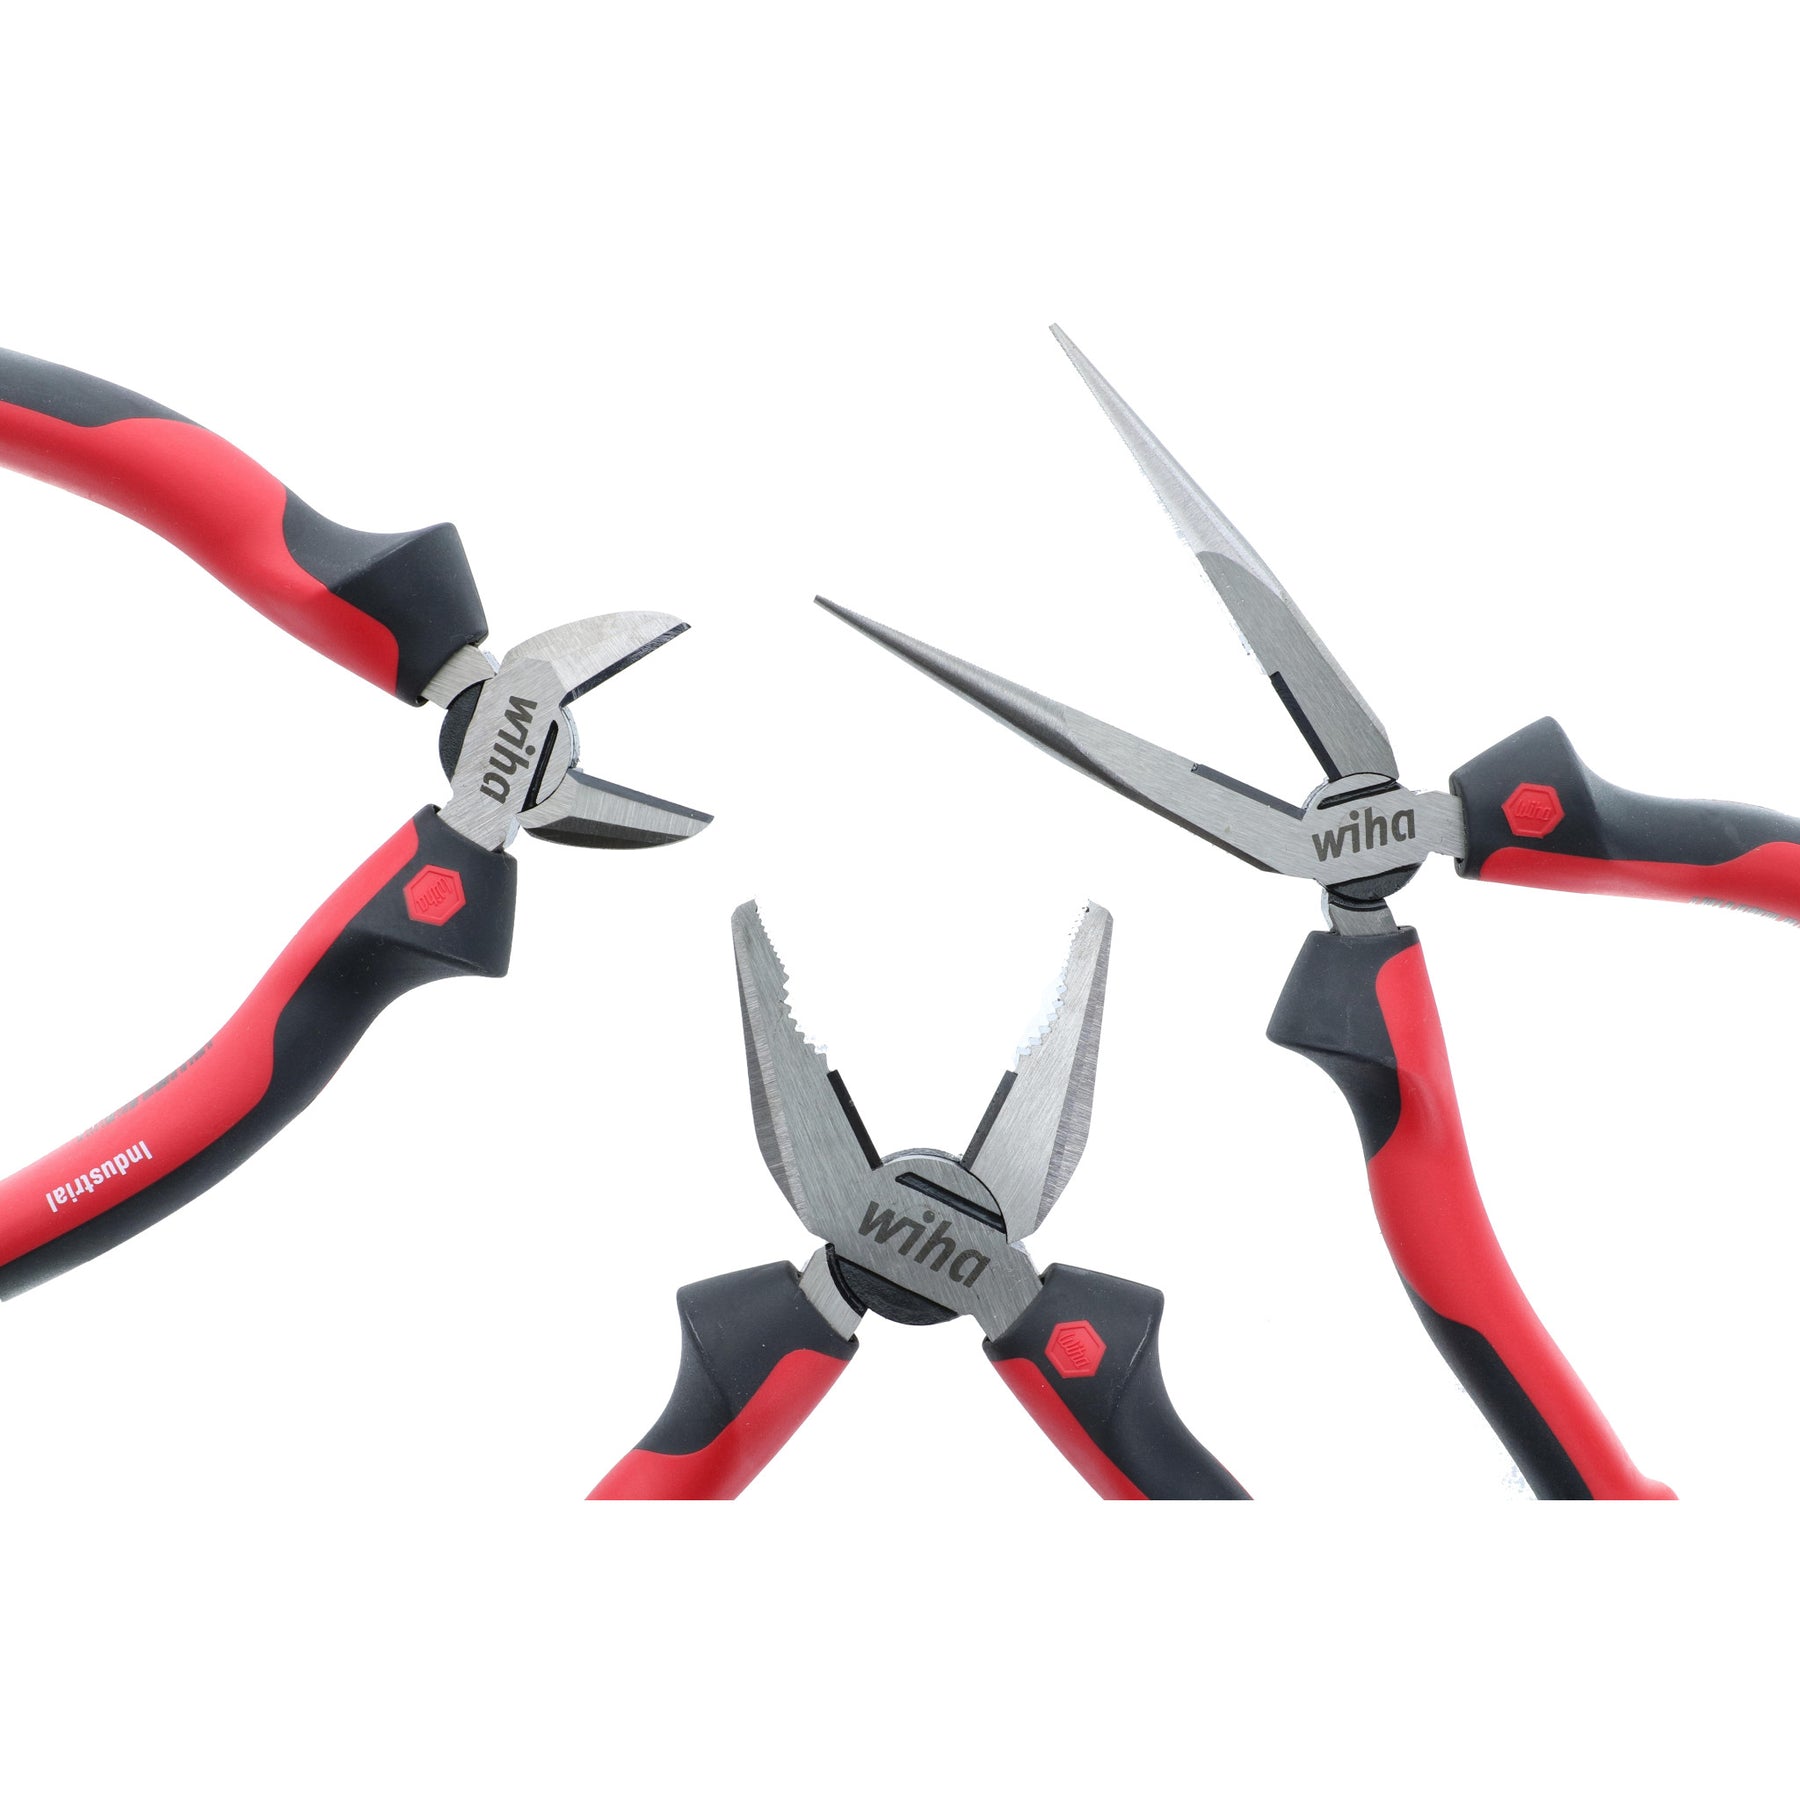 3 Piece Industrial SoftGrip Pliers and Cutters Set